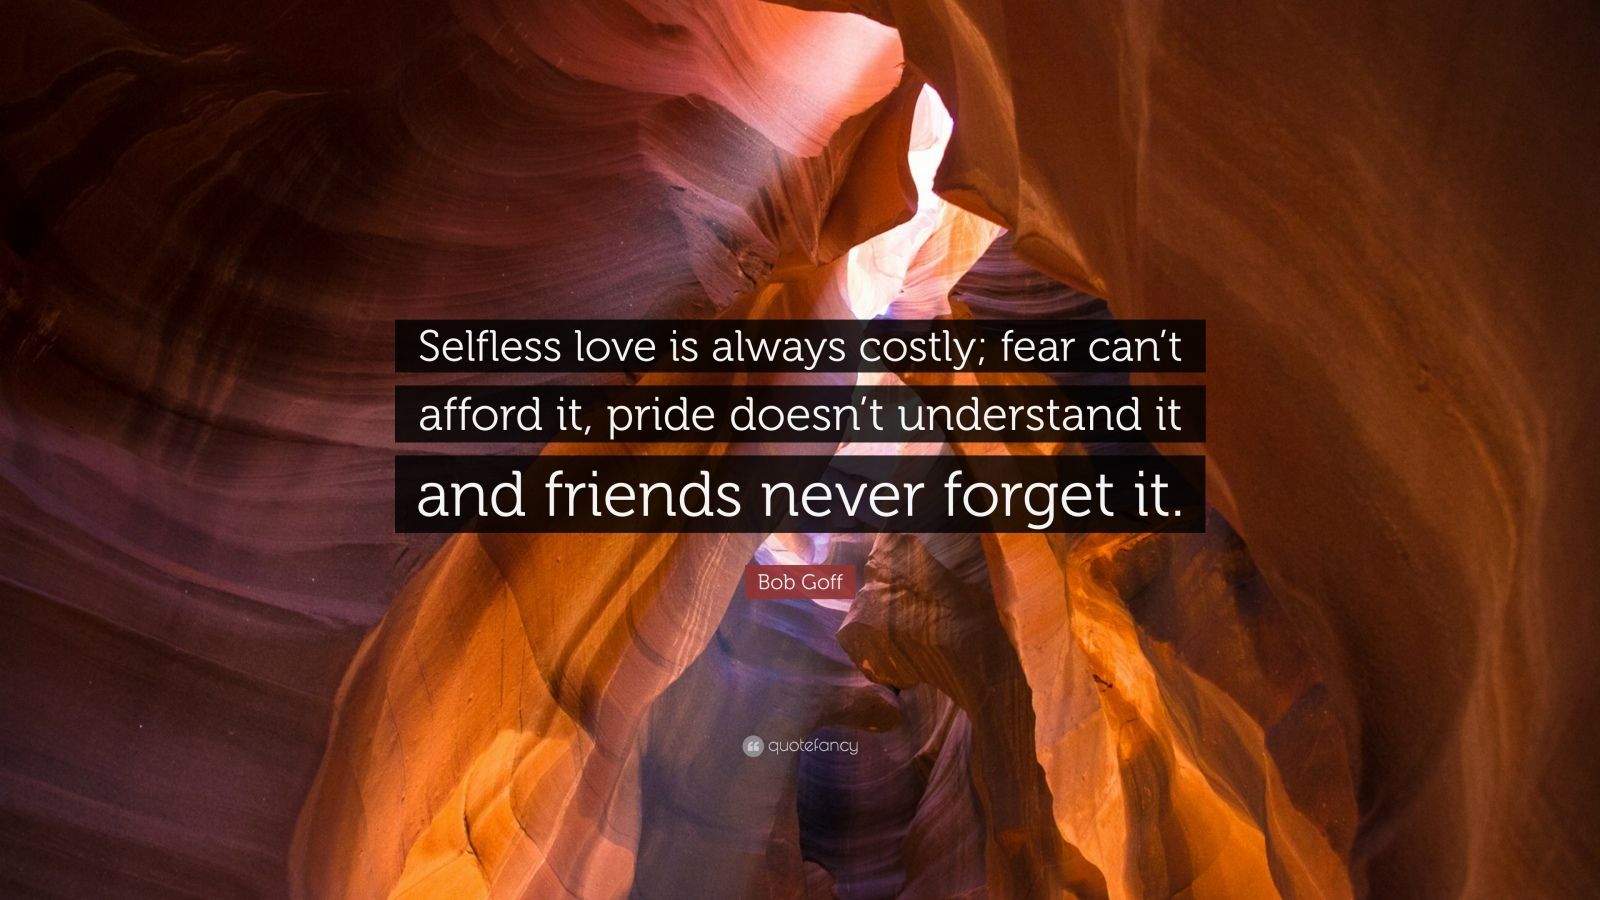 Bob Goff Quote: “Selfless love is always costly; fear can't afford